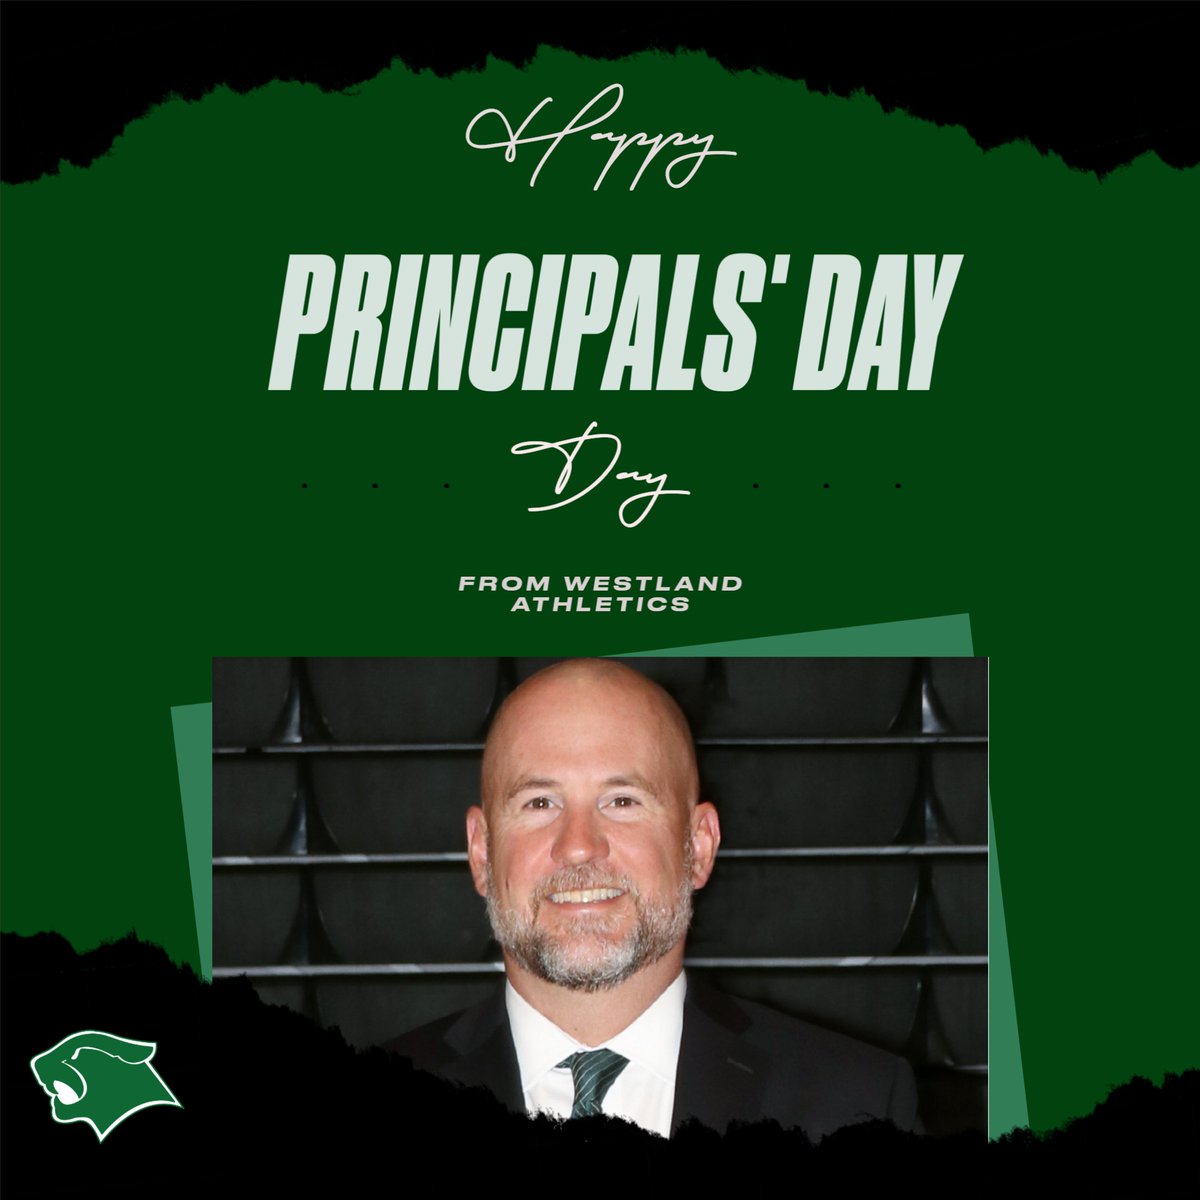 Thank you to our Head Principal Mr. Costello!

#GoCougars